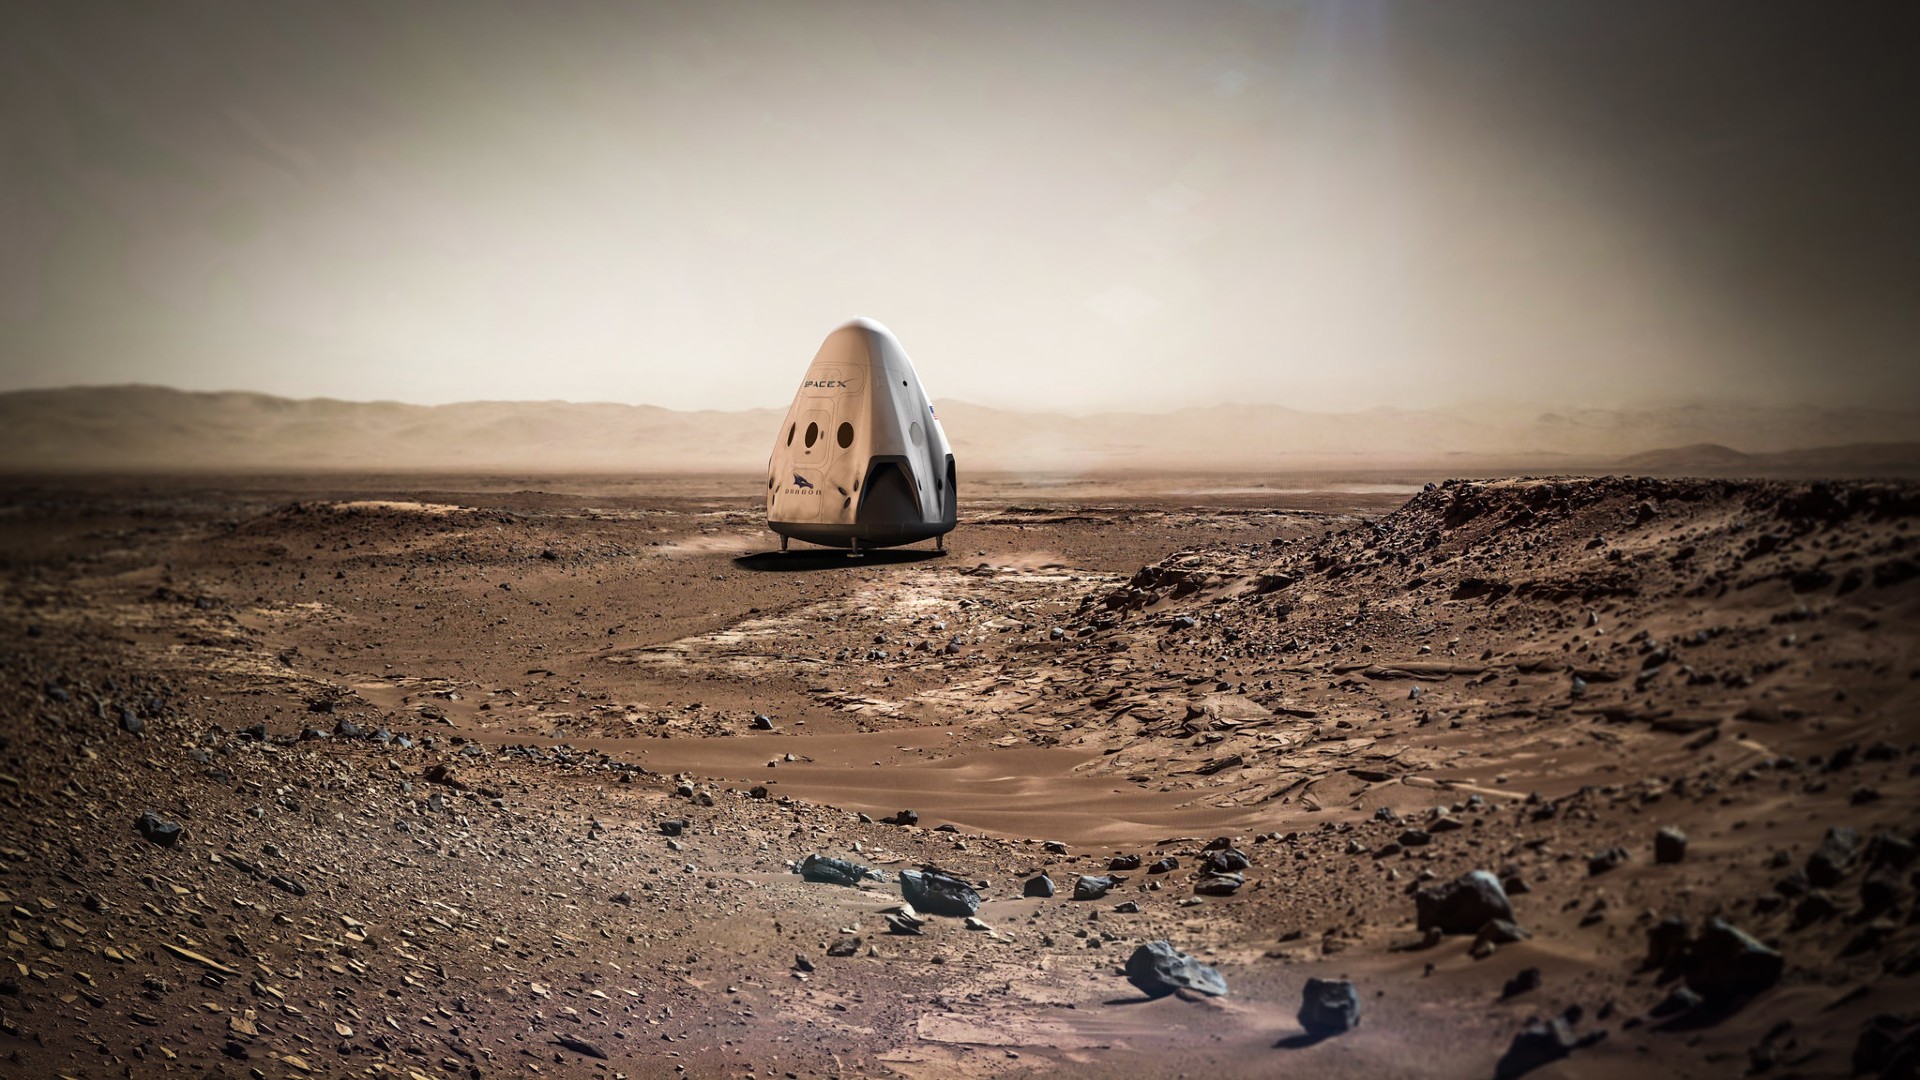 An illustration of a SpaceX Dragon capsule landing on Mars.